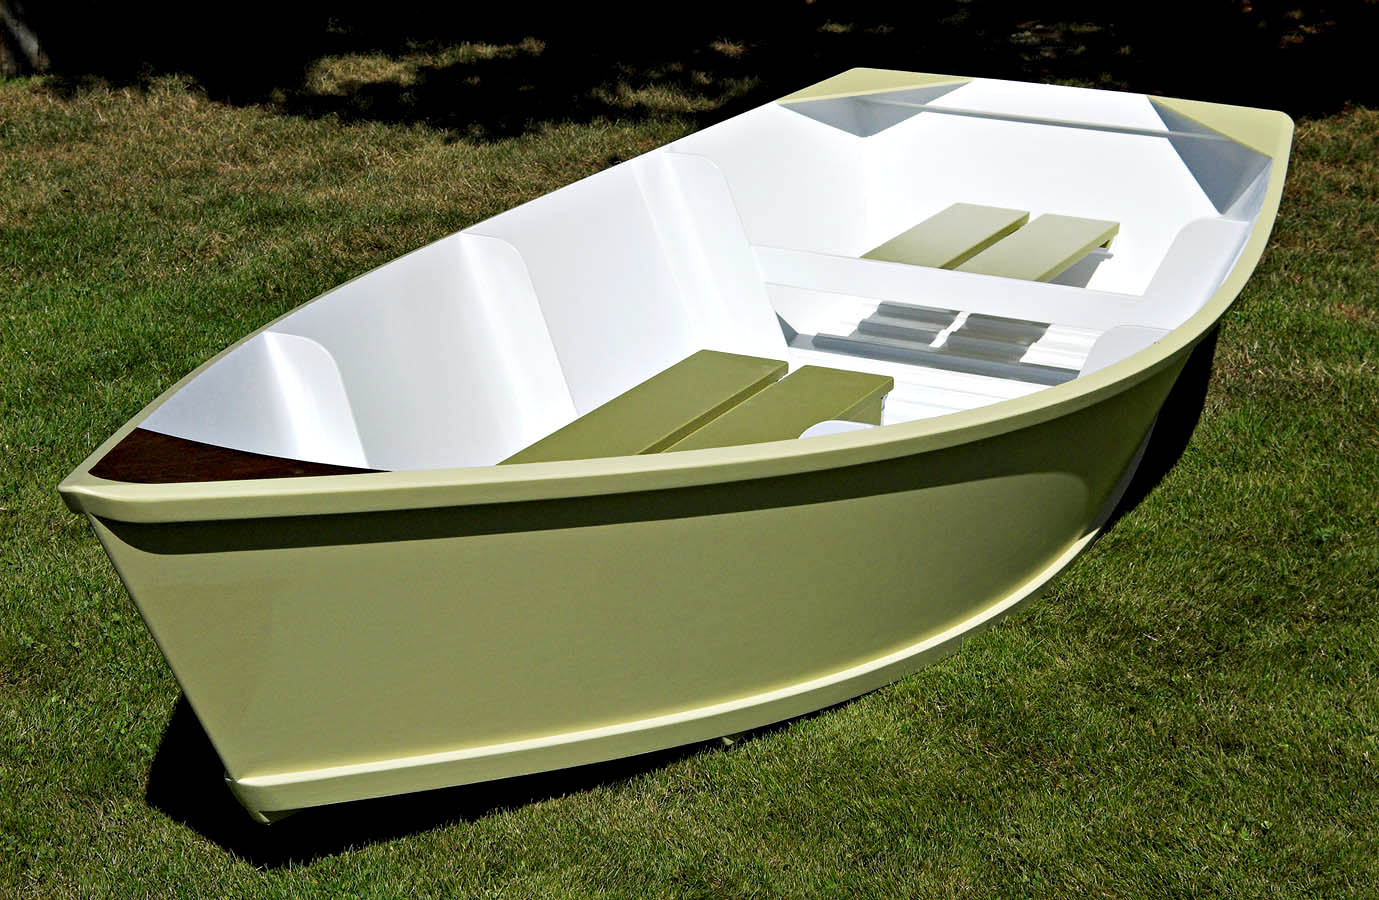 uk small plywood boats pdf plan for small plywood boats small plywood 